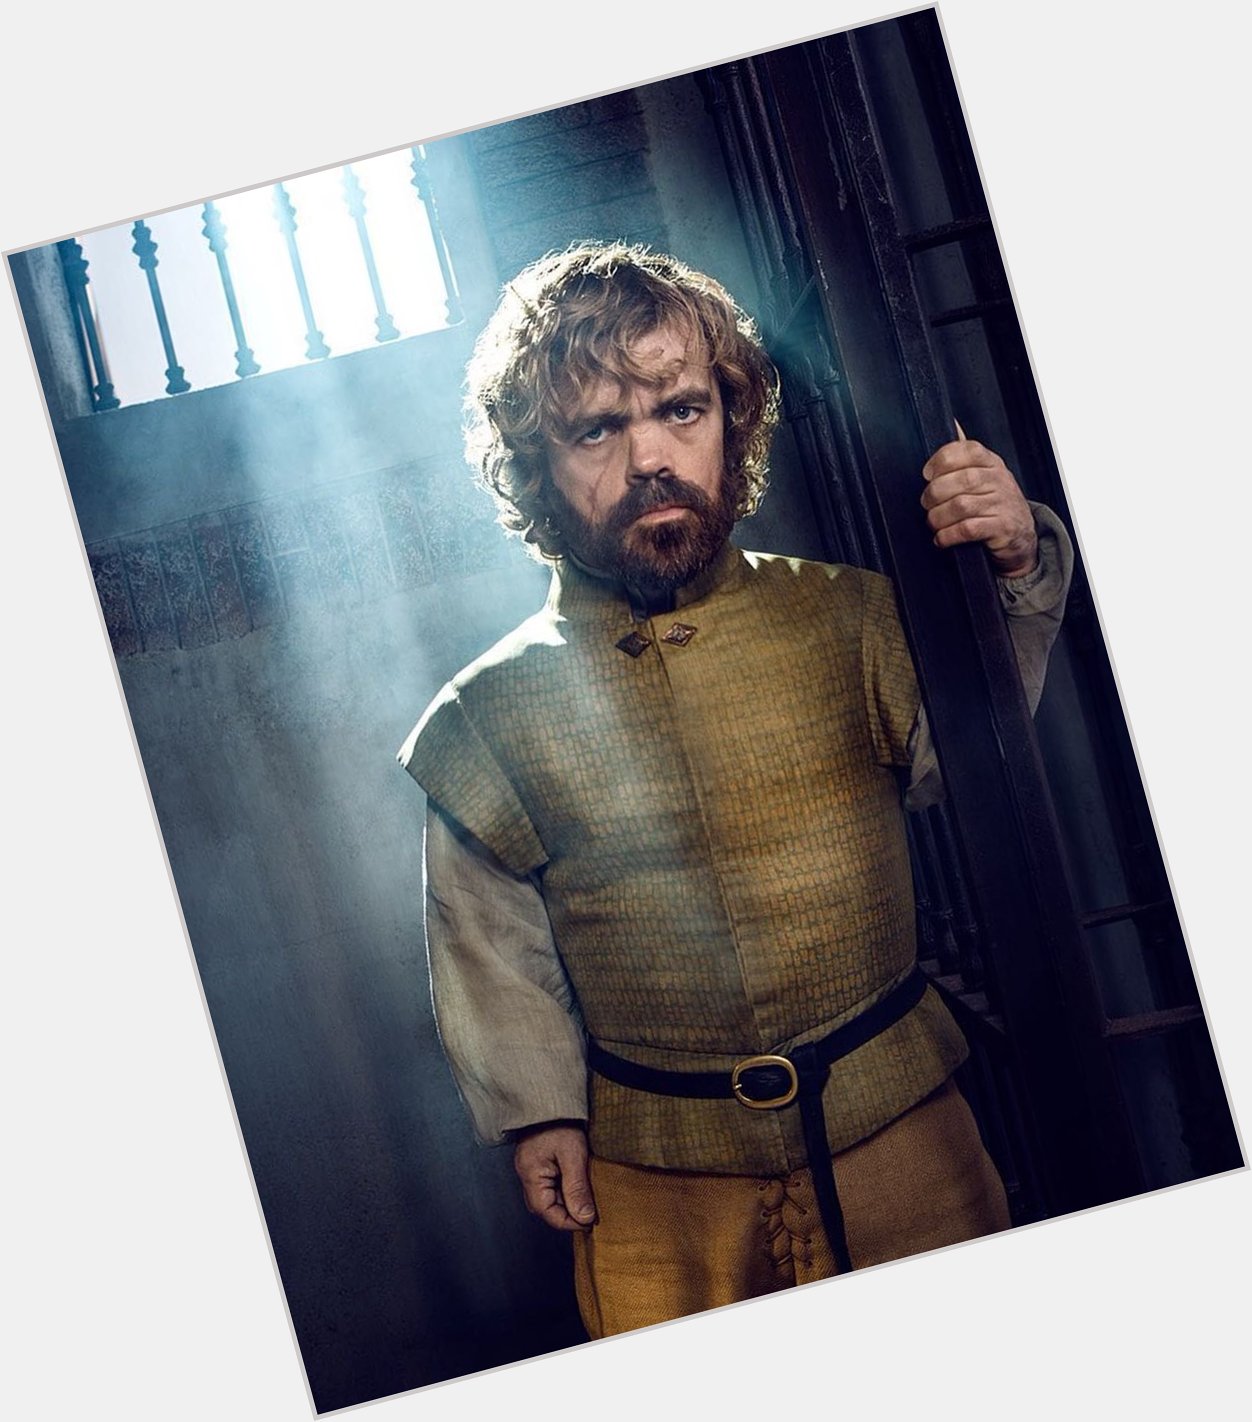   Happy 53rd birthday to Peter Dinklage!  